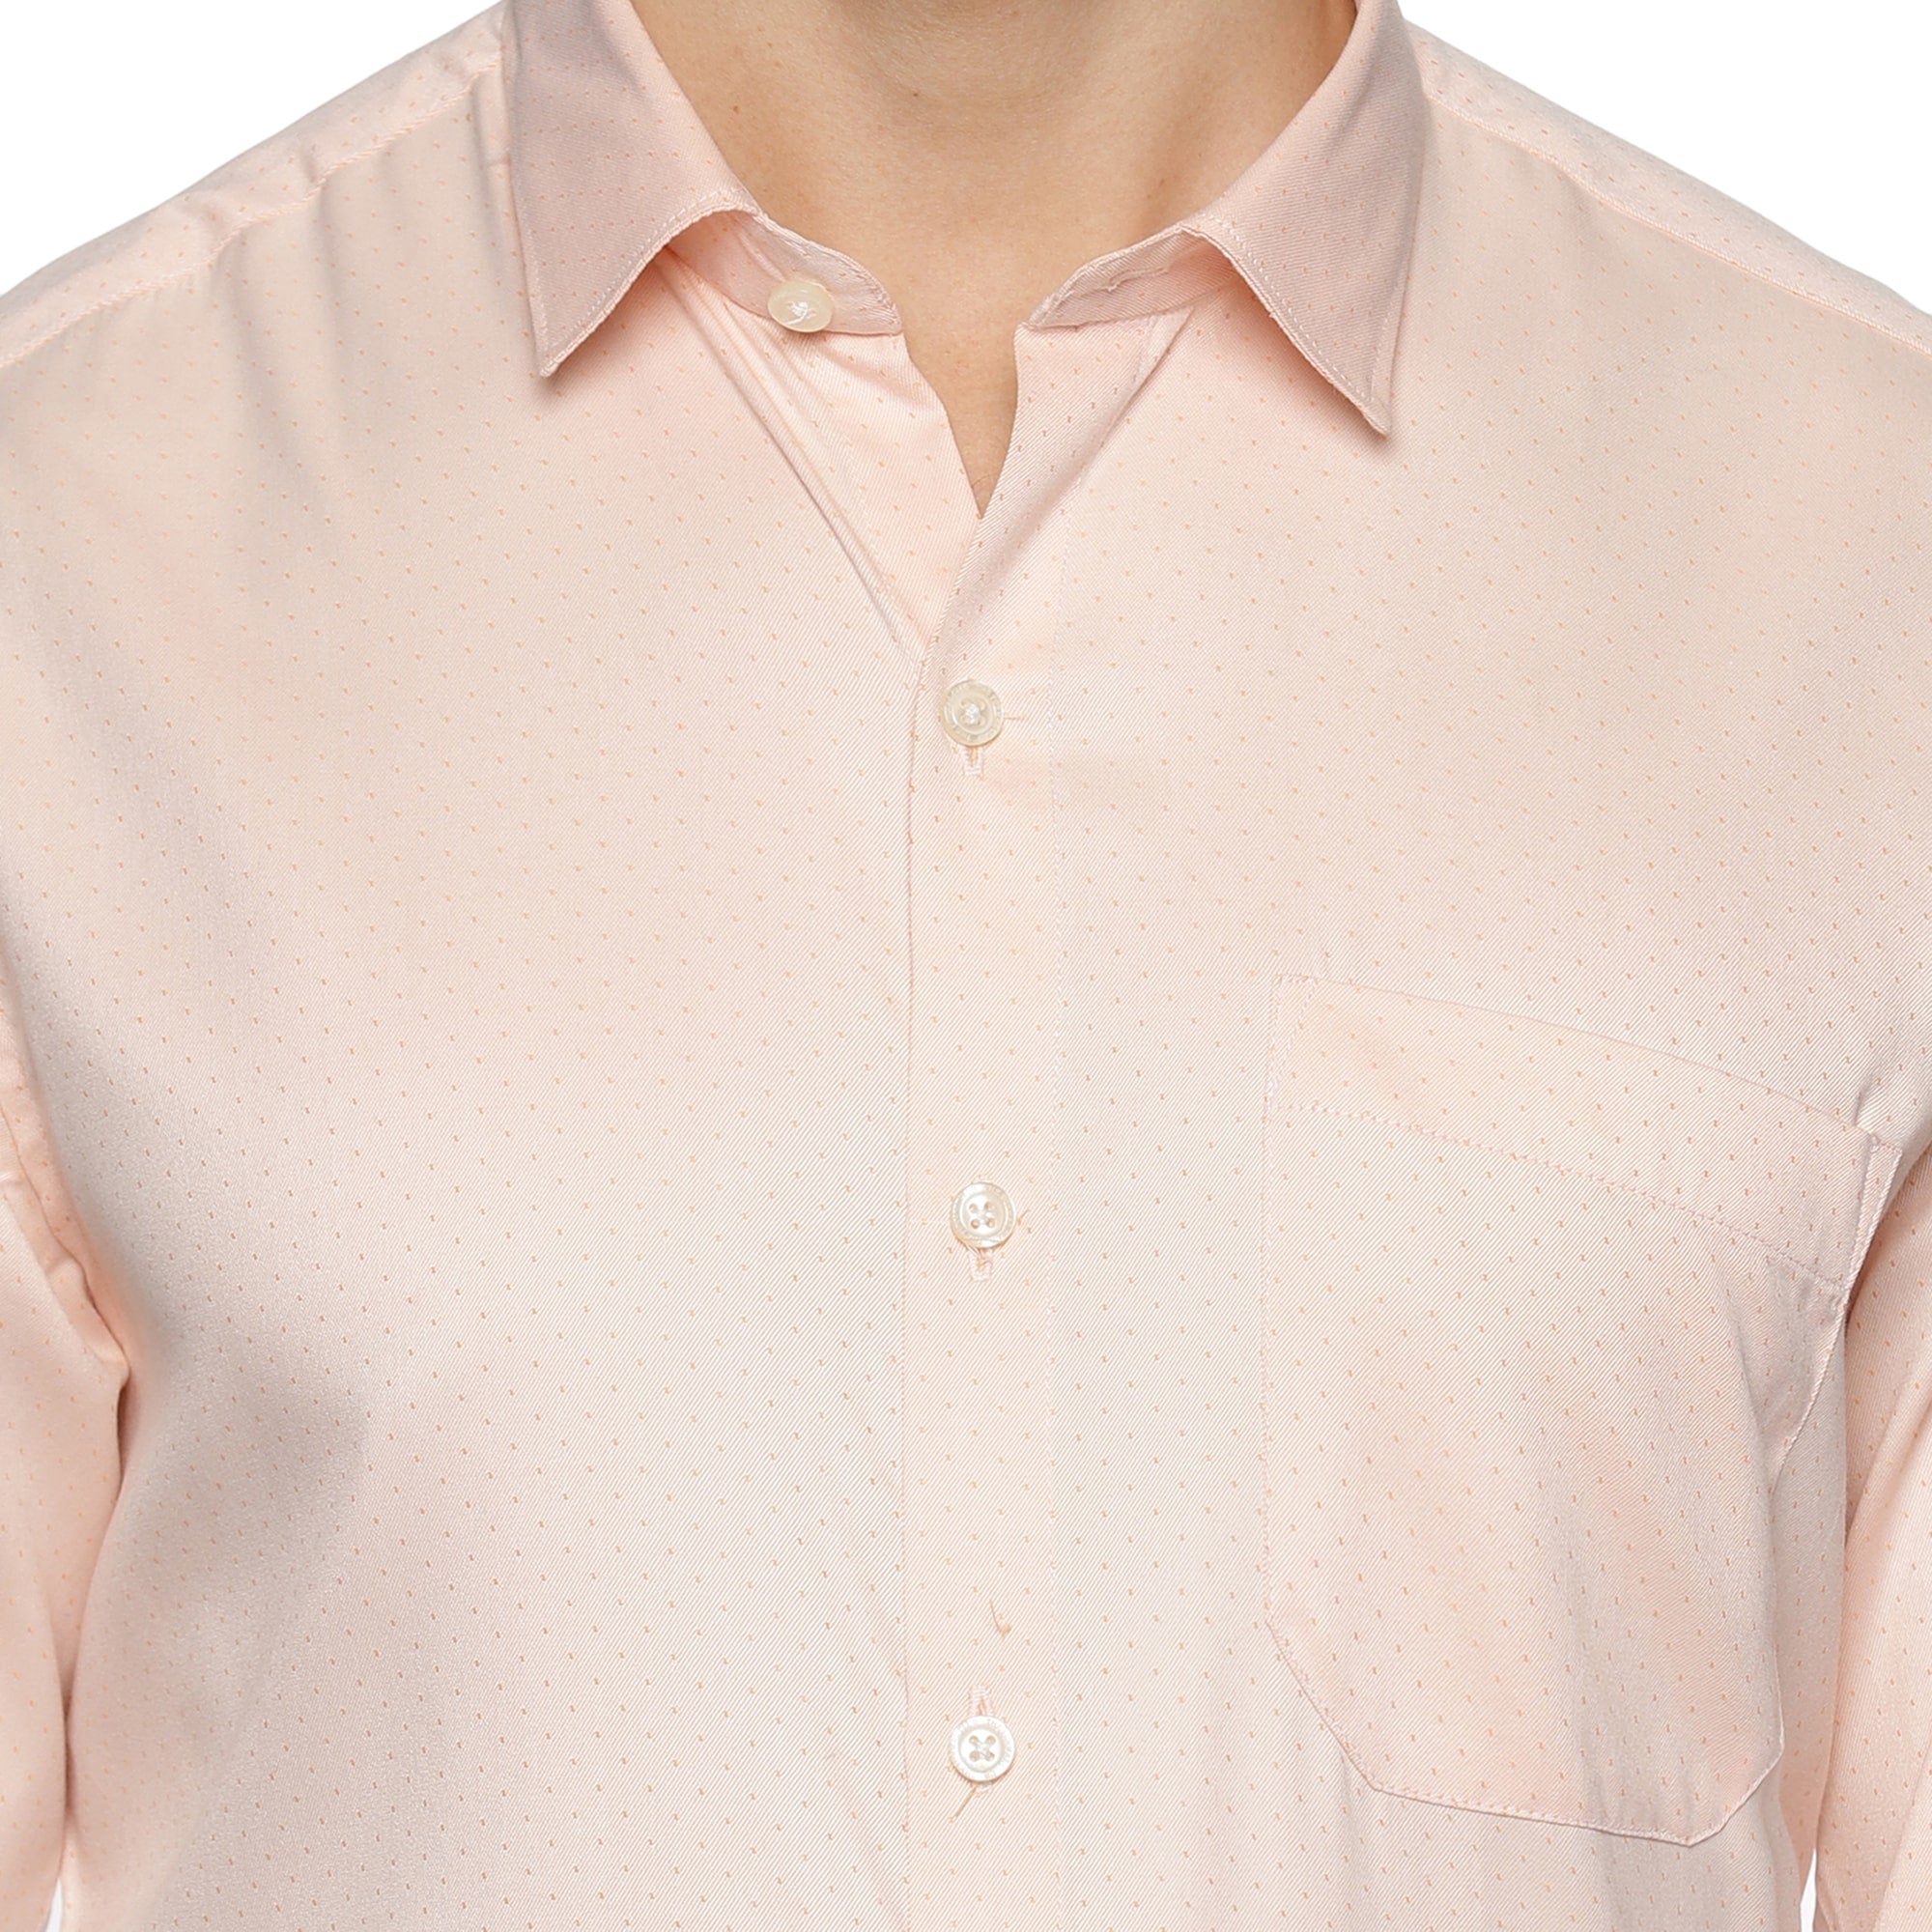 Donald Dobby Textured Shirt in Peach - The Formal Club